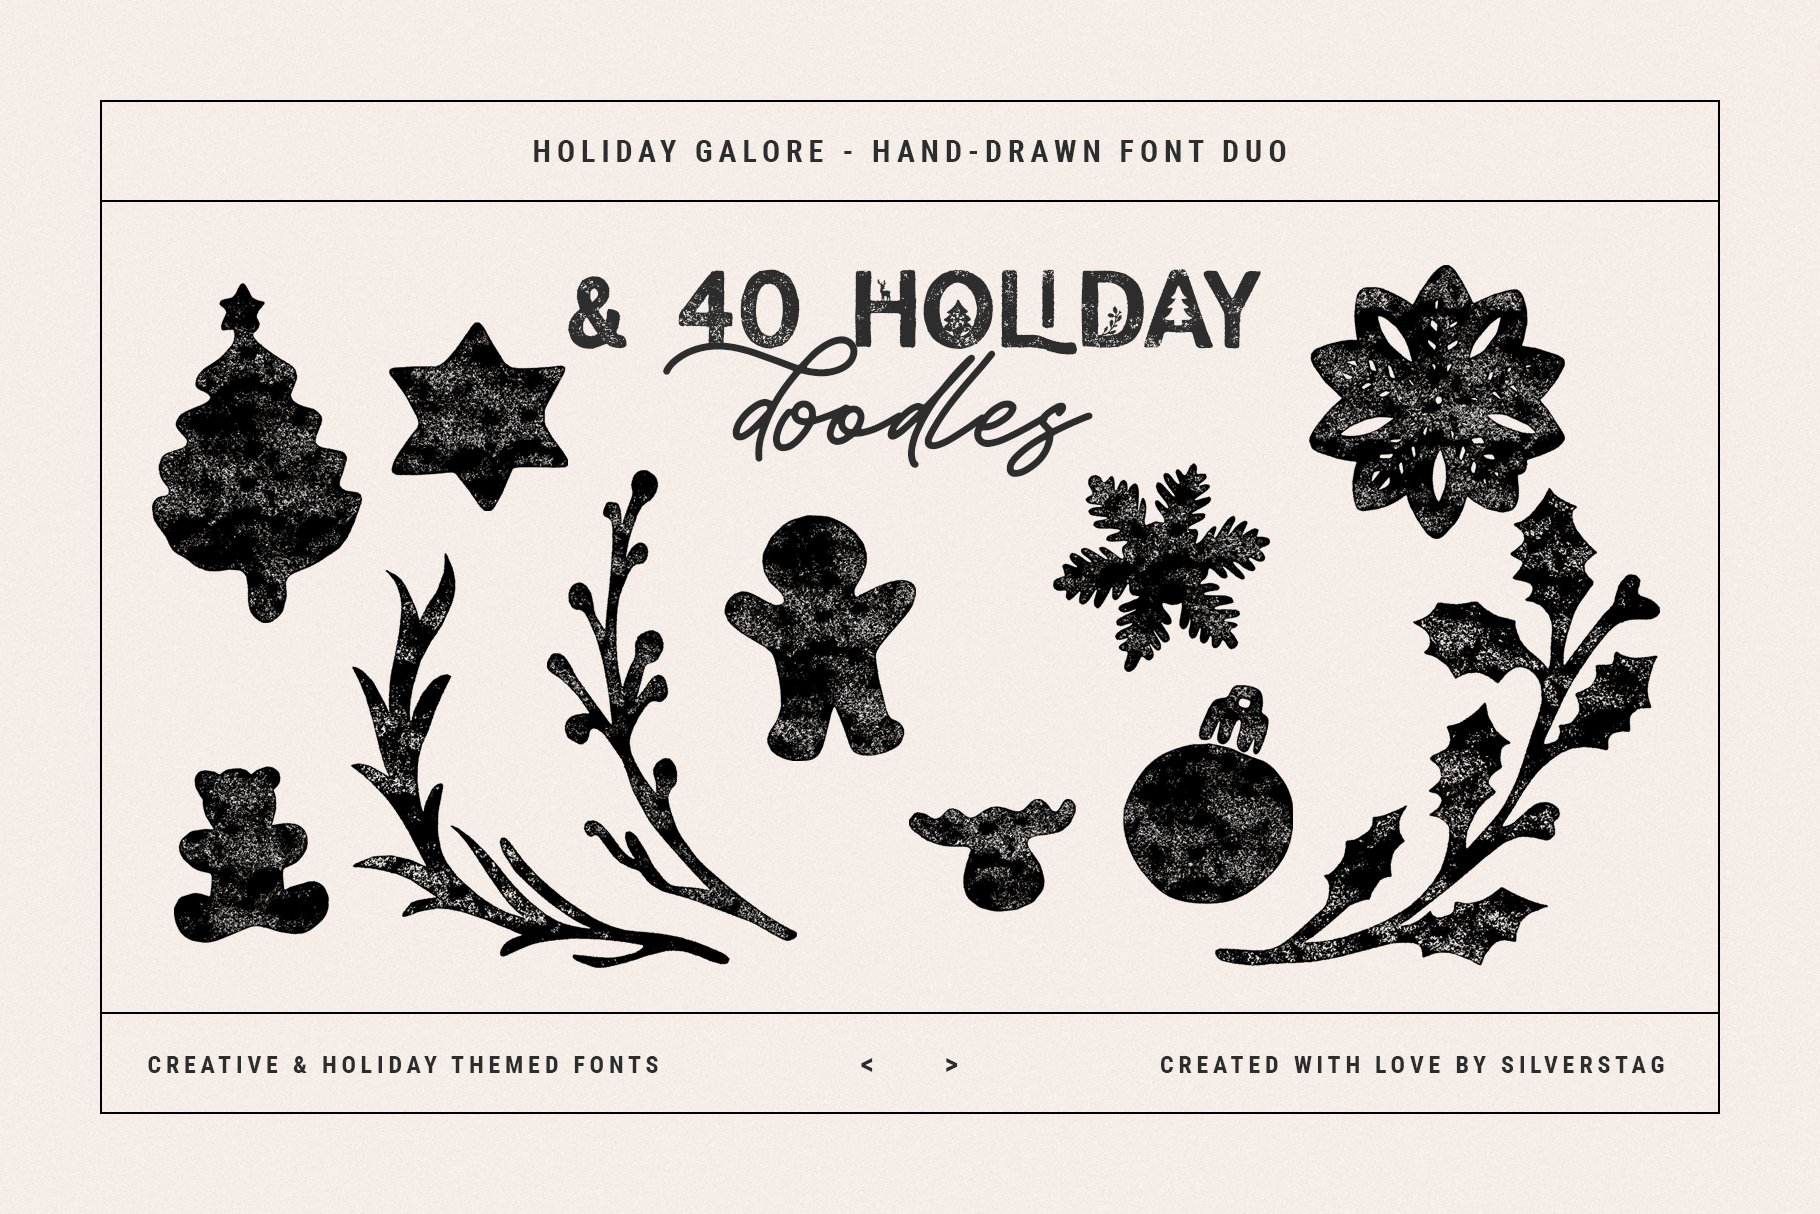 37 holiday galore font duo by silver stag 693